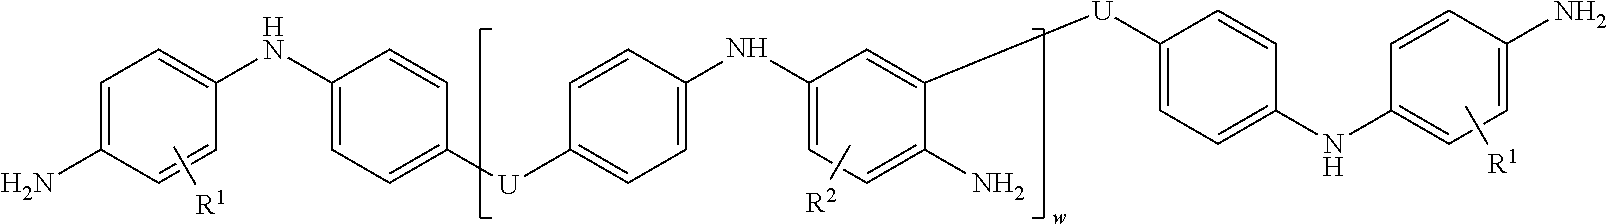 Lubricating Composition Containing a Carboxylic Functionalised Polymer